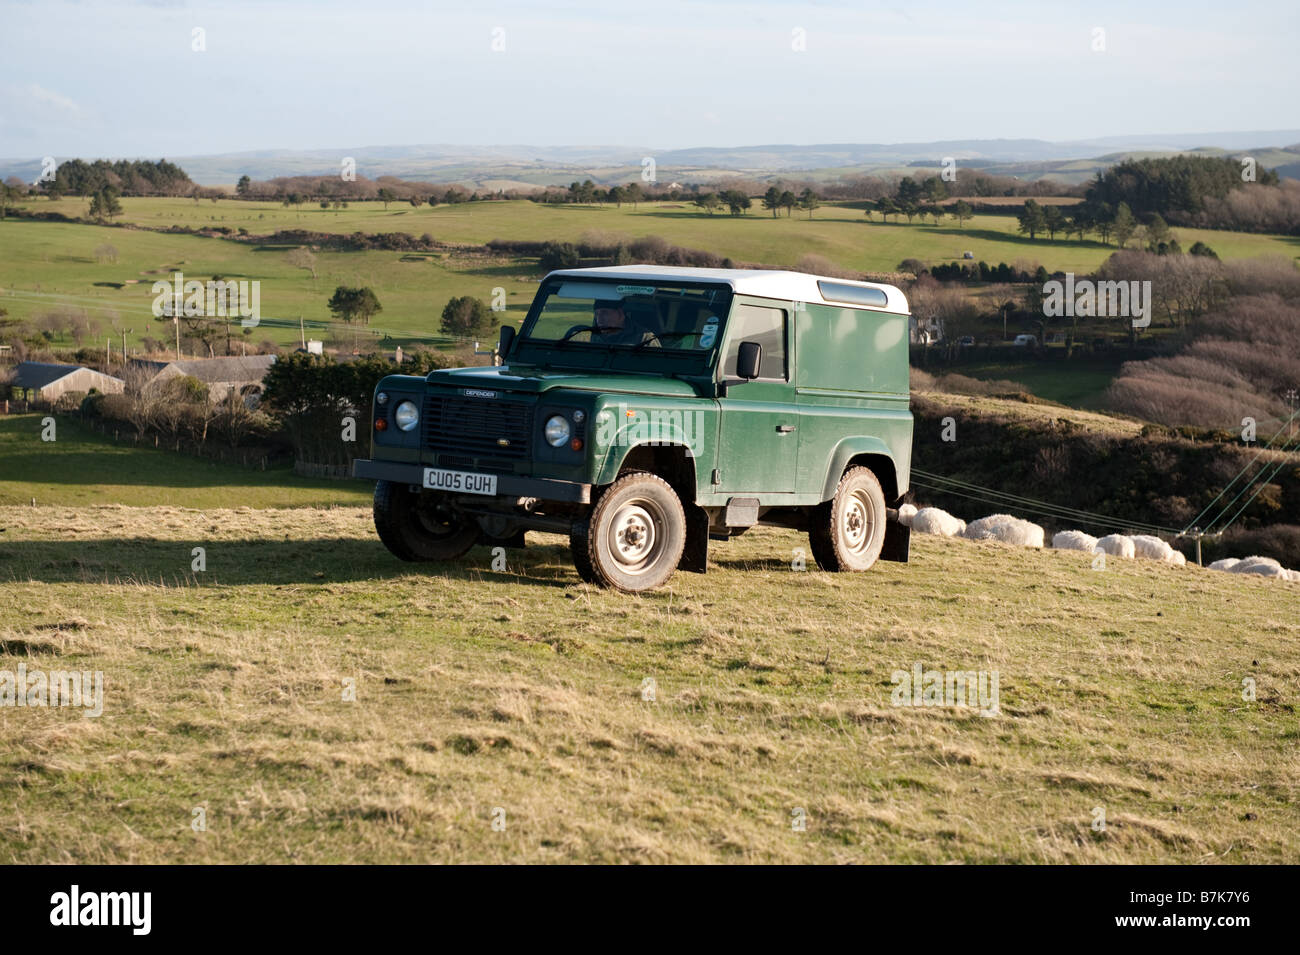 A farmer driving his 4x4 Landrover working vehicle in his field Wales UK to feed his sheep Stock Photo